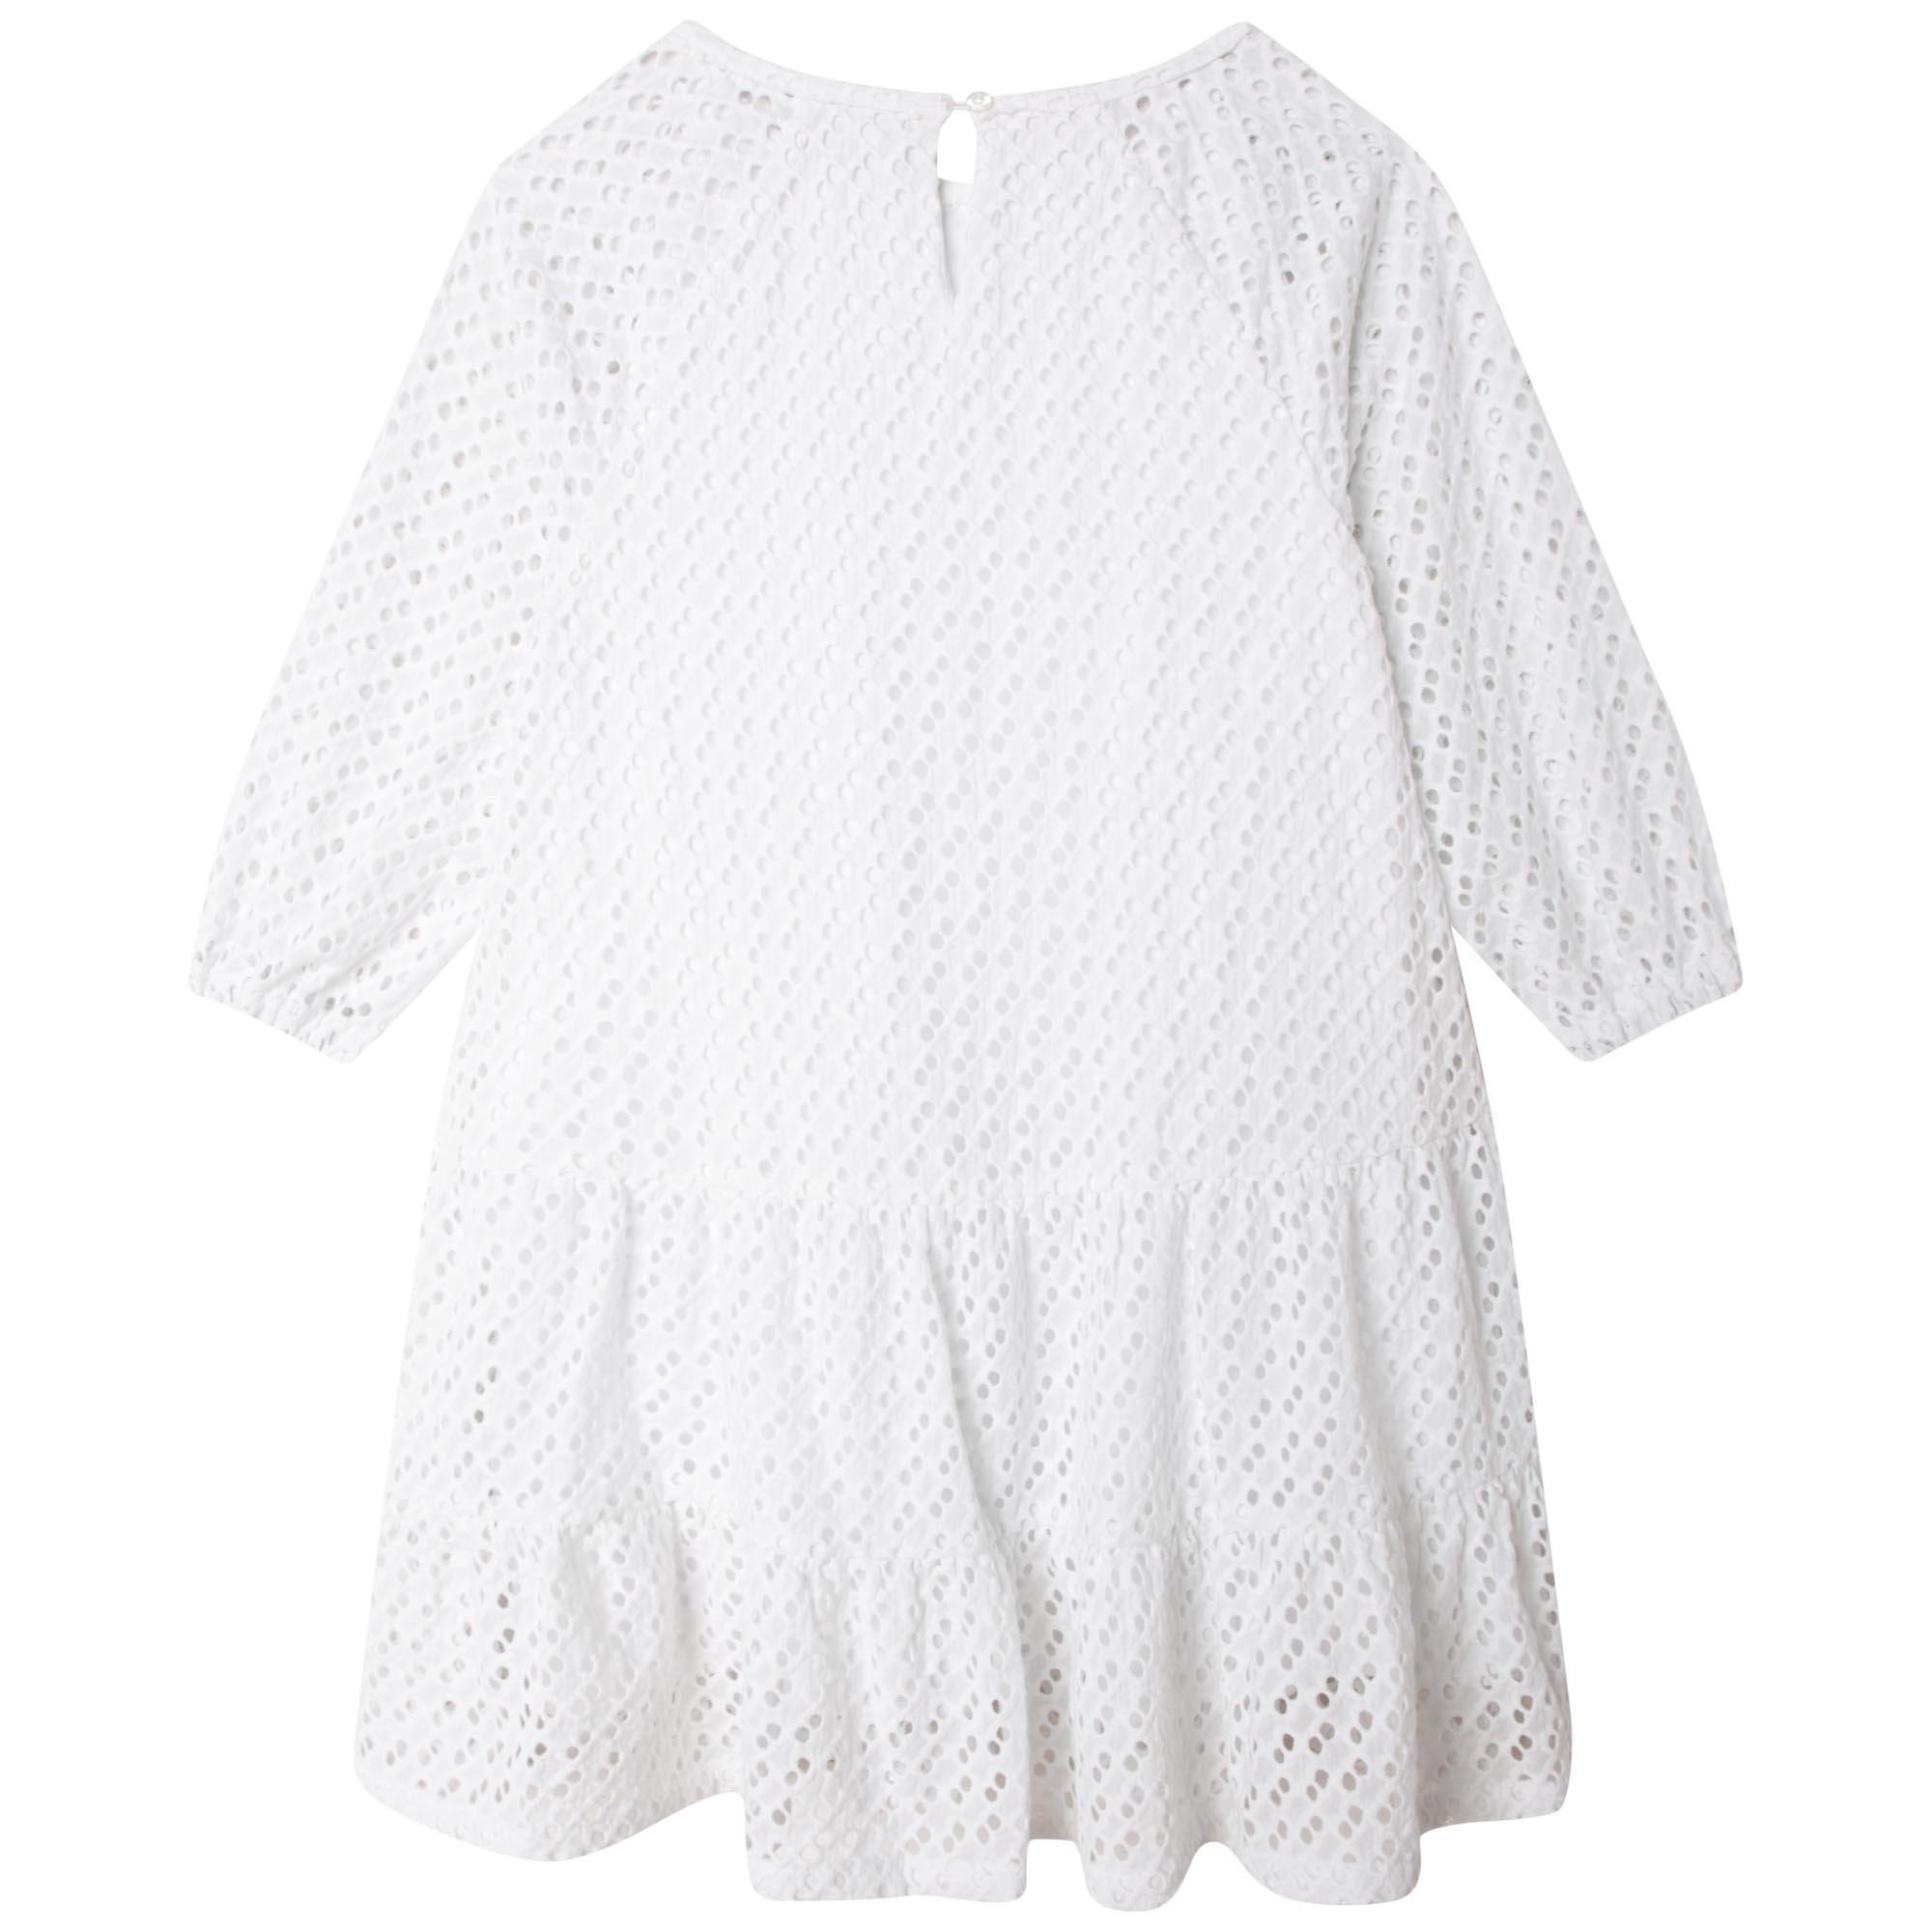 Cotton broderie anglaise dress BOSS for GIRL